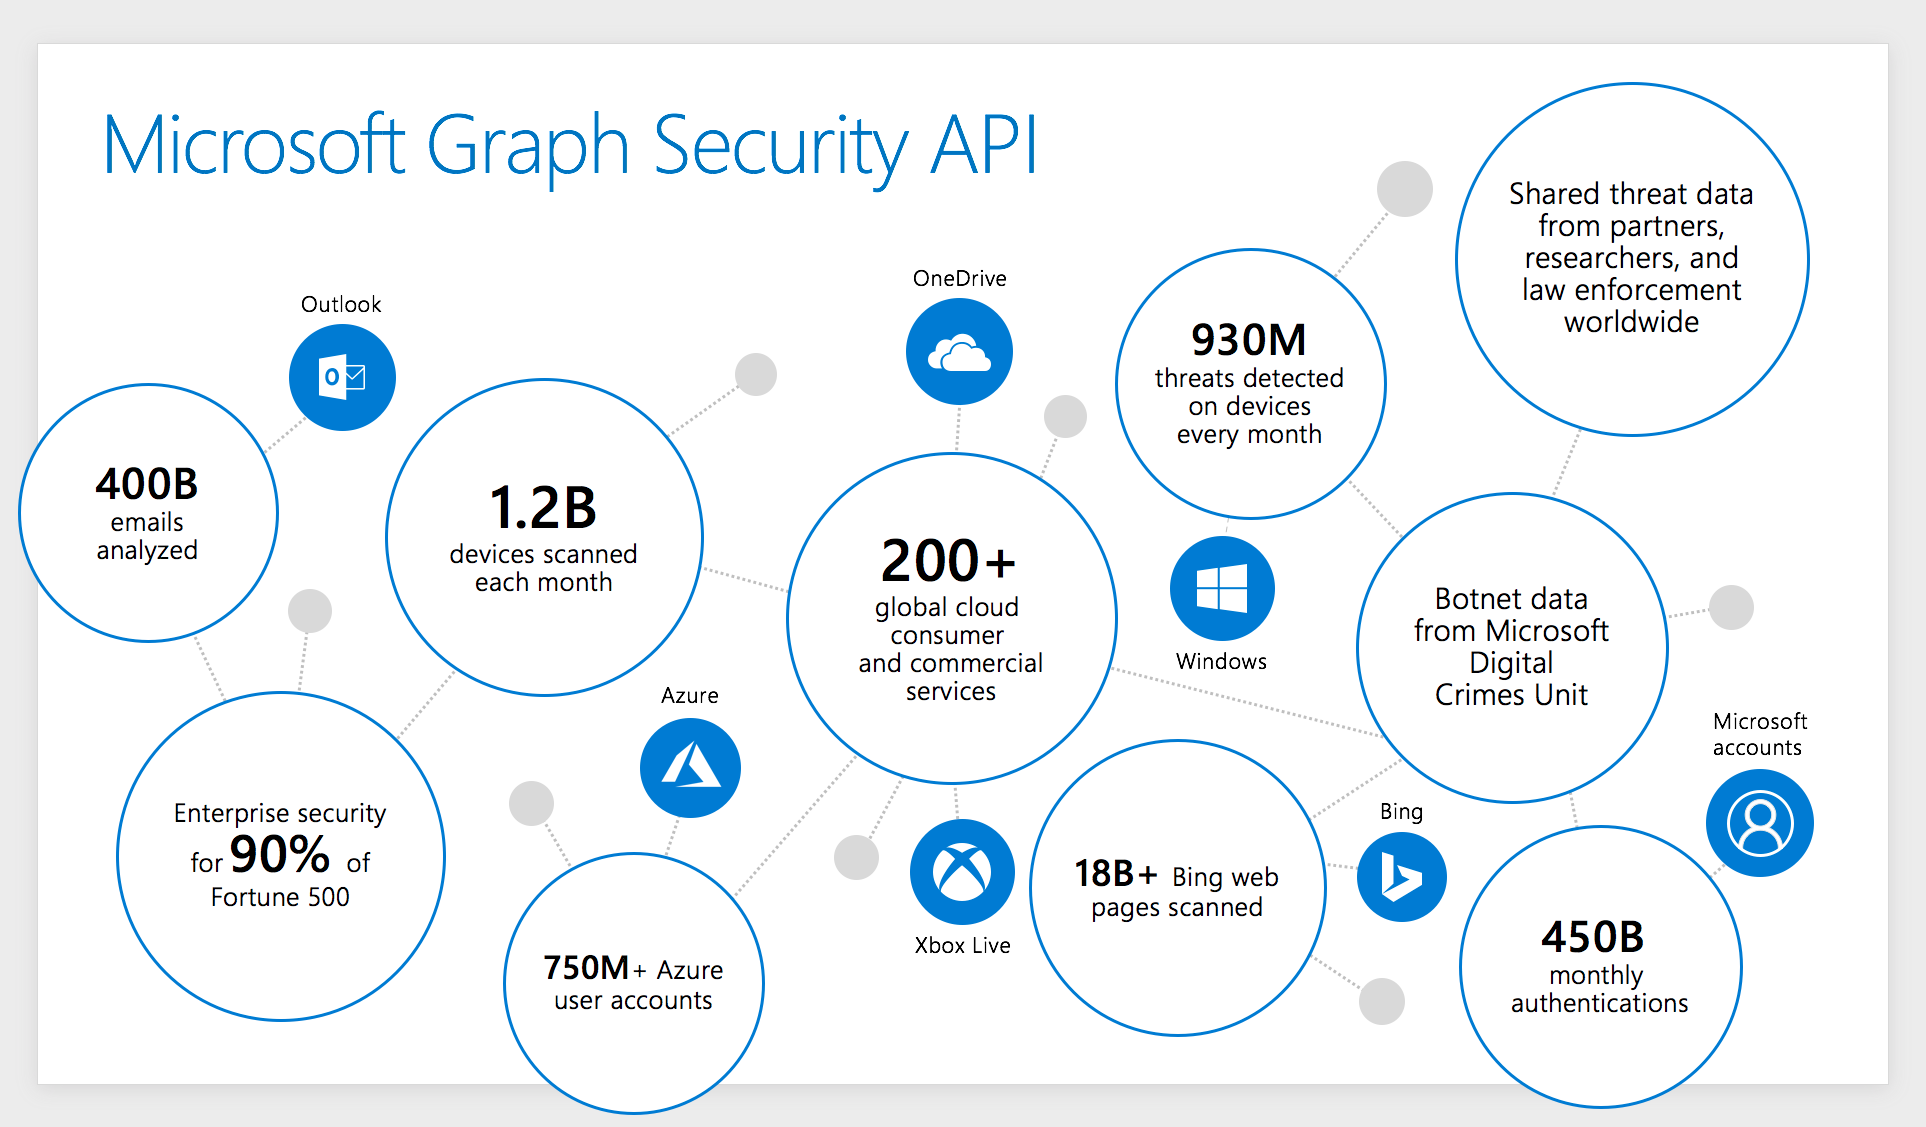 Microsoft global threat intelligence is one of the largest in the industry